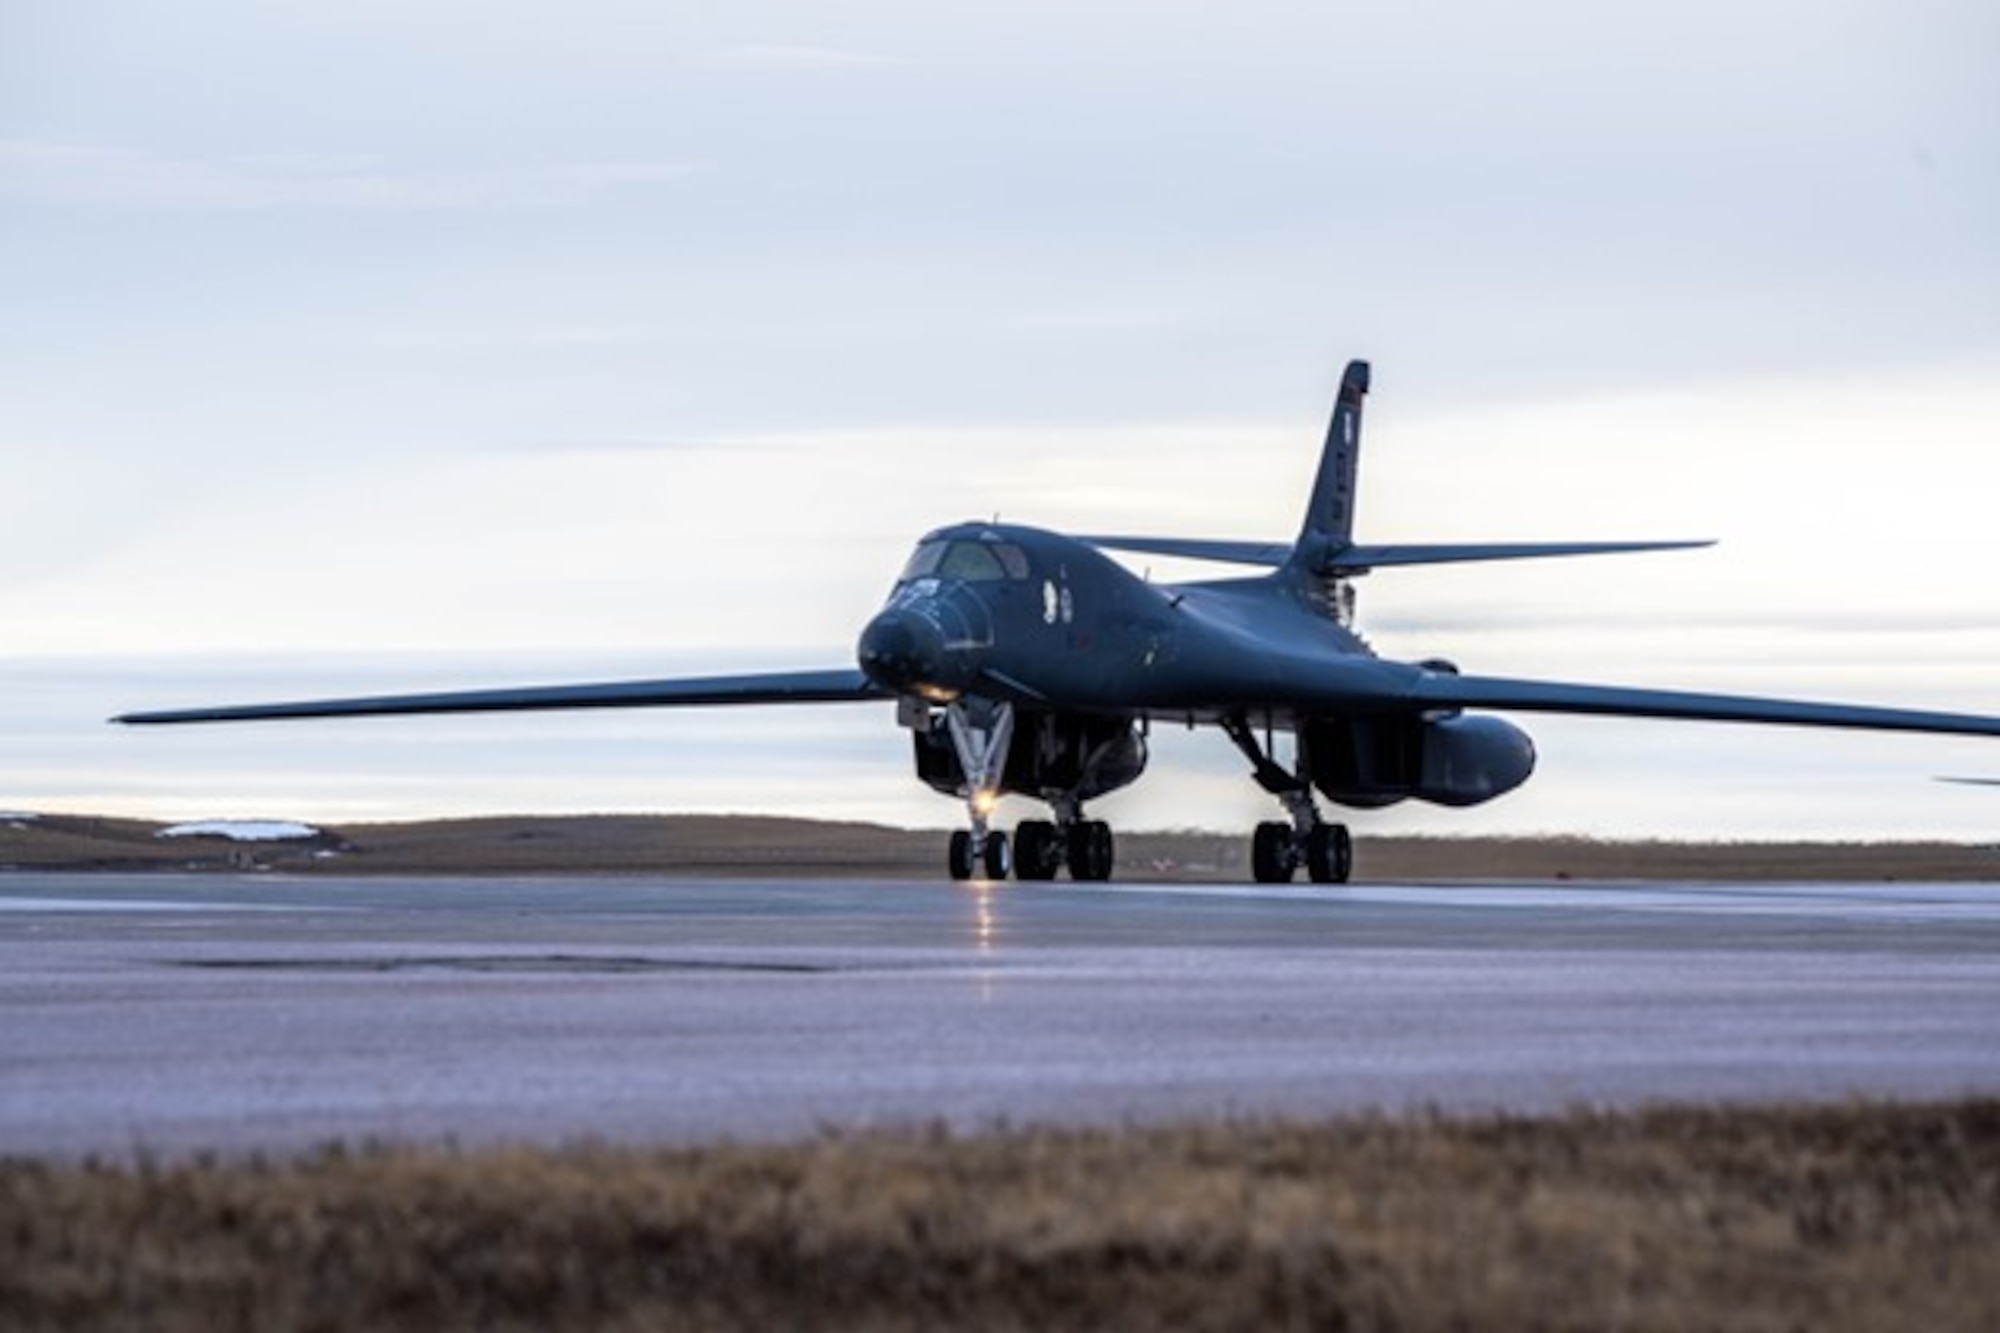 A U.S. Air Force B-1B Lancer, assigned to the 37th Bomb Squadron, taxis at Ellsworth Air Force Base, South Dakota, after completing a long-duration CONUS-to-CONUS (C2C) mission to the Indo-Pacific Jan. 10, 2023. .C2C missions contribute to joint force lethality and deter aggression in the Indo-Pacific by demonstrating USAF ability to operate anywhere in the world at any time in support of the National Defense Strategy. (U.S. Air Force photo by A1C Josephine Pepin)